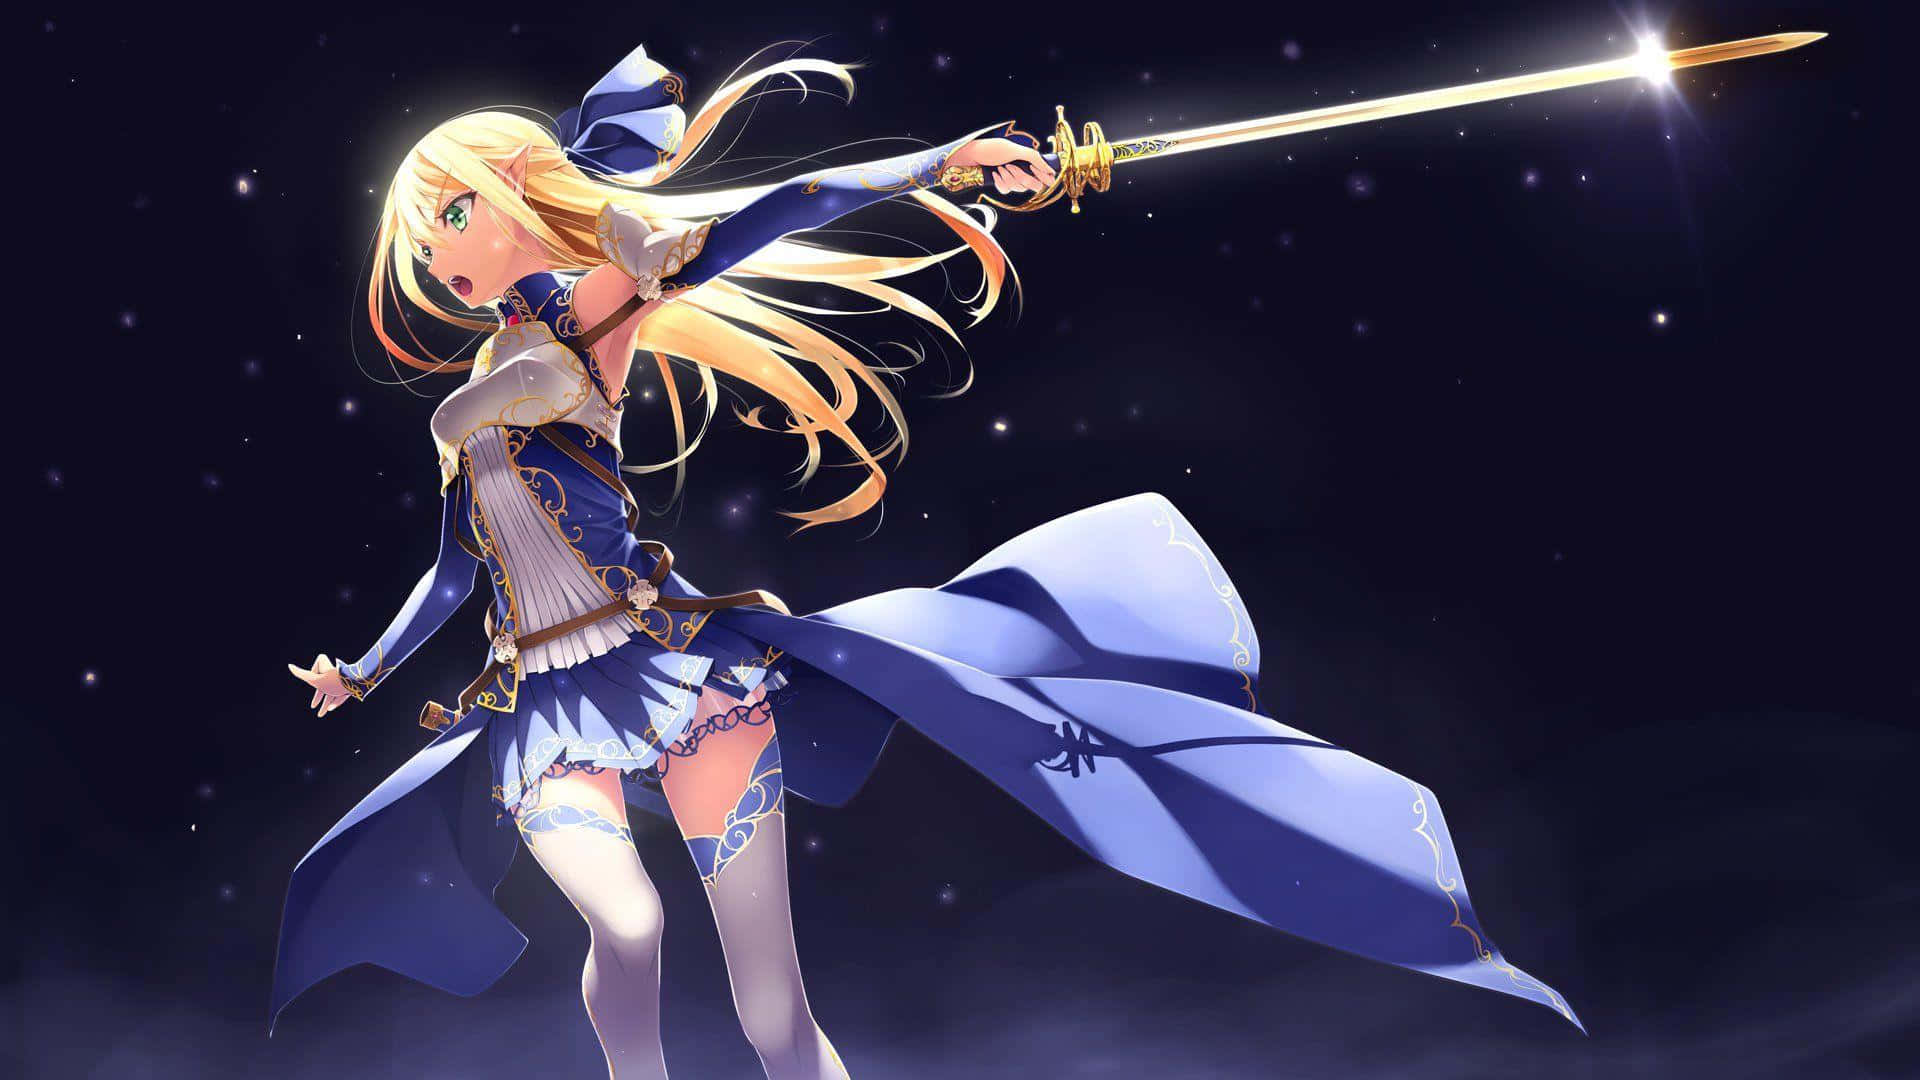 Cool Anime Character Magic Girl With Sword Wallpaper